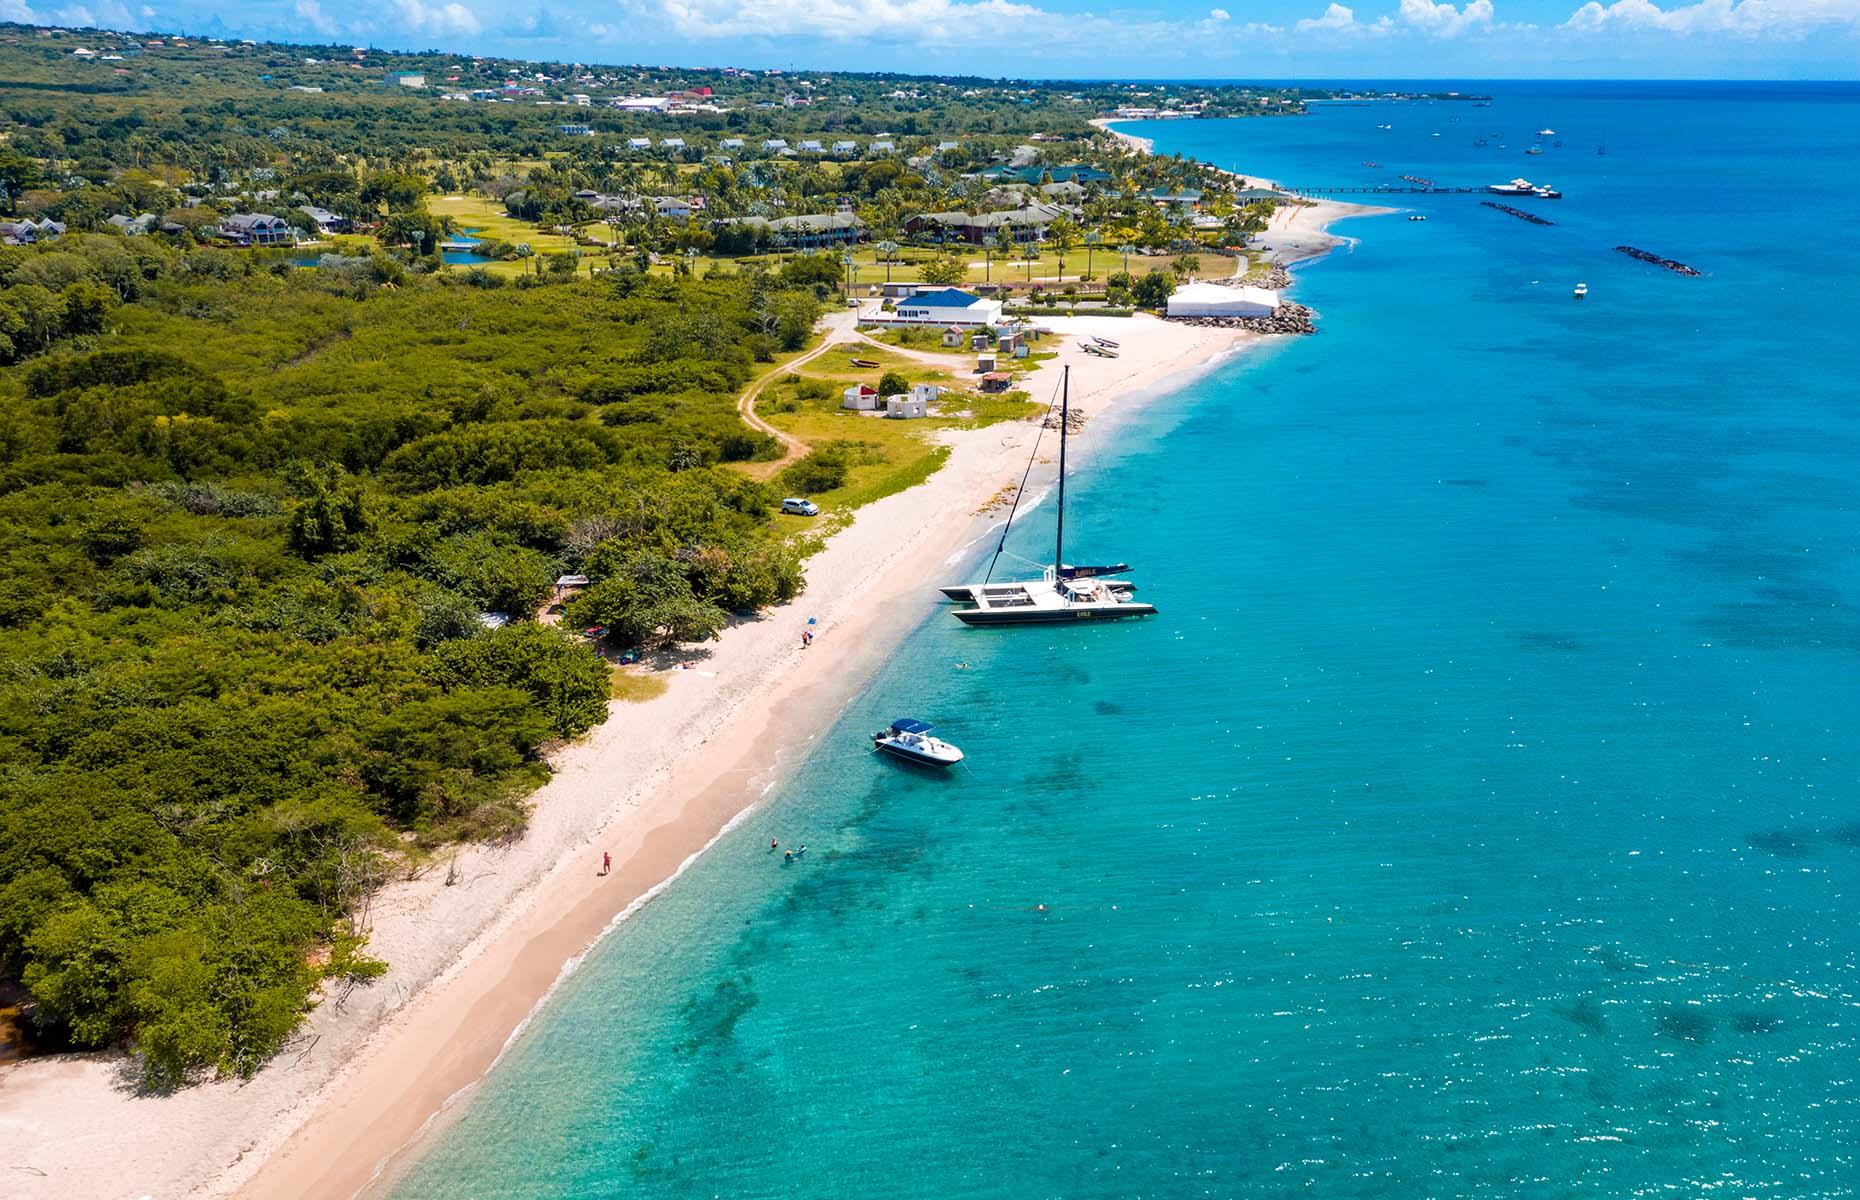 <p>British Airways offers twice-weekly flights from London Gatwick to Robert L. Bradshaw International Airport in St. Kitts, where guests are transported by a short water taxi ride to Nevis.</p>  <p><em>Our writer stayed at the <a href="https://www.fourseasons.com/nevis/">Four Seasons Resort</a> and <a href="https://www.goldenrocknevis.com/">Golden Rock Inn</a>. For more information on Nevis visit <a href="https://nevisisland.com/">the Nevis Tourism Authority website</a>.</em></p>  <p><strong><a href="https://www.loveexploring.com/galleries/69354/50-experiences-you-didnt-know-you-could-have-in-the-caribbean">Now discover 50 experiences you didn’t know you could have in the Caribbean</a></strong></p>